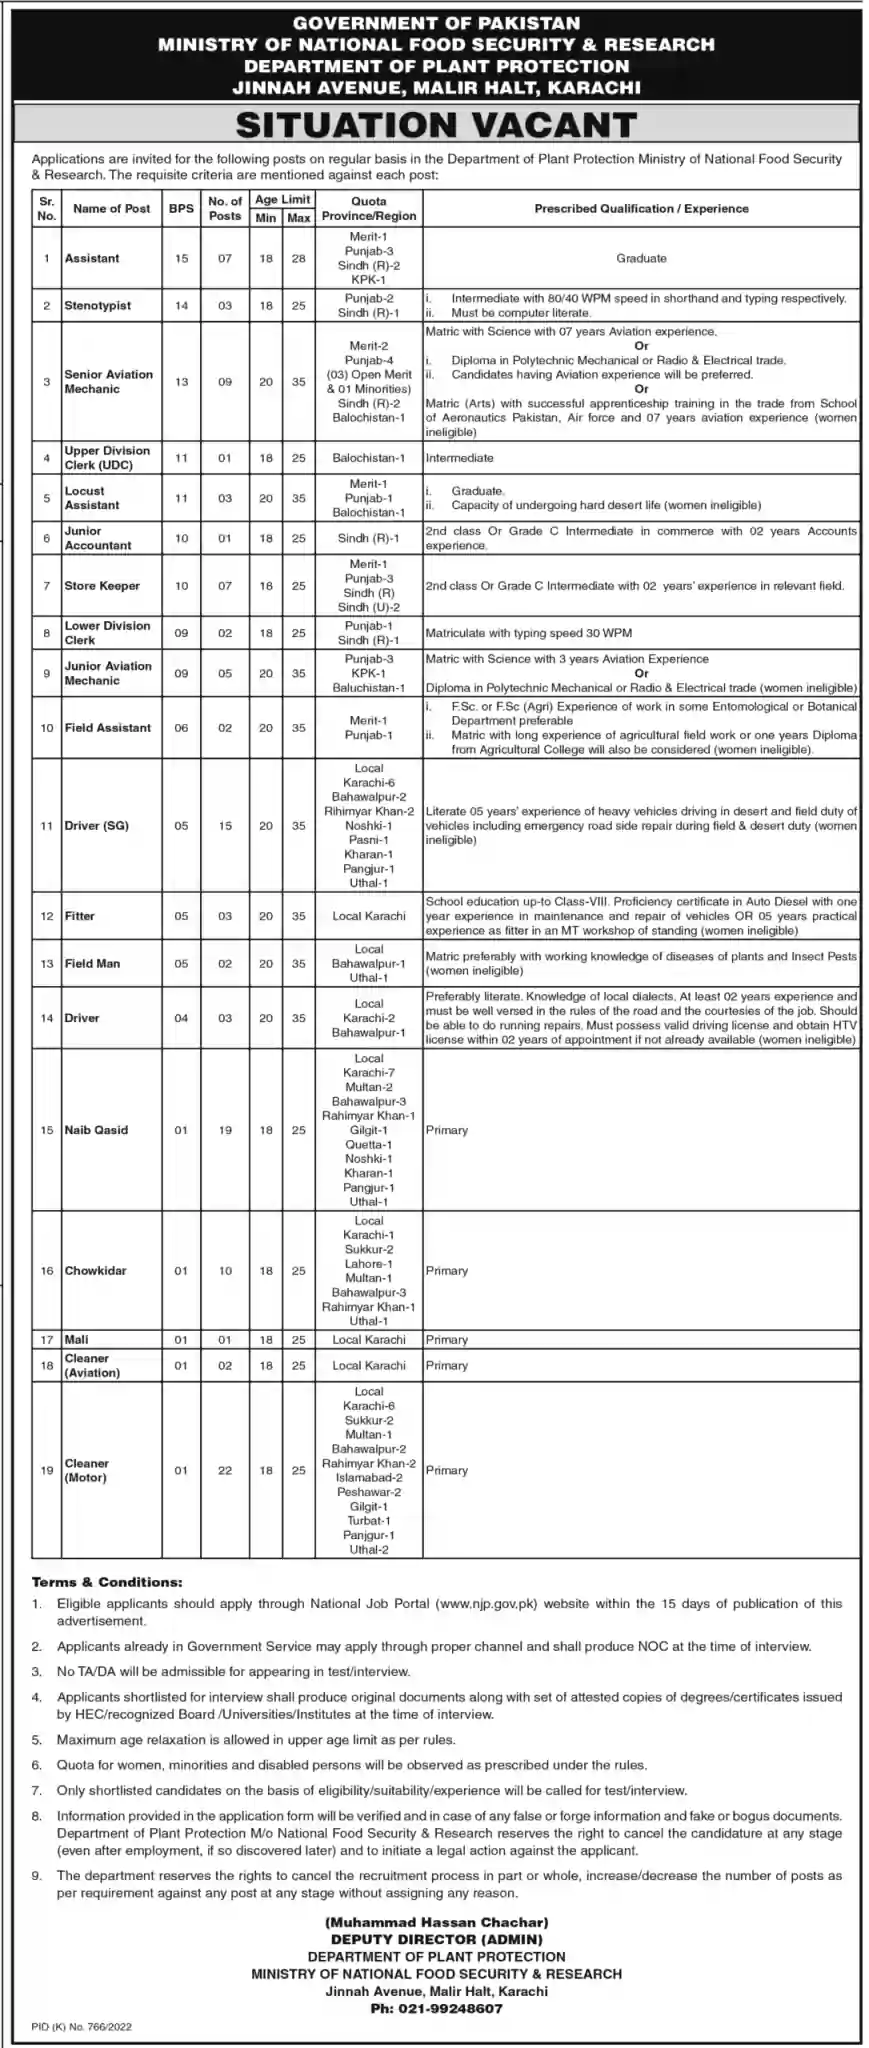 Ministry of National Food Security & Research Jobs 2022, 2